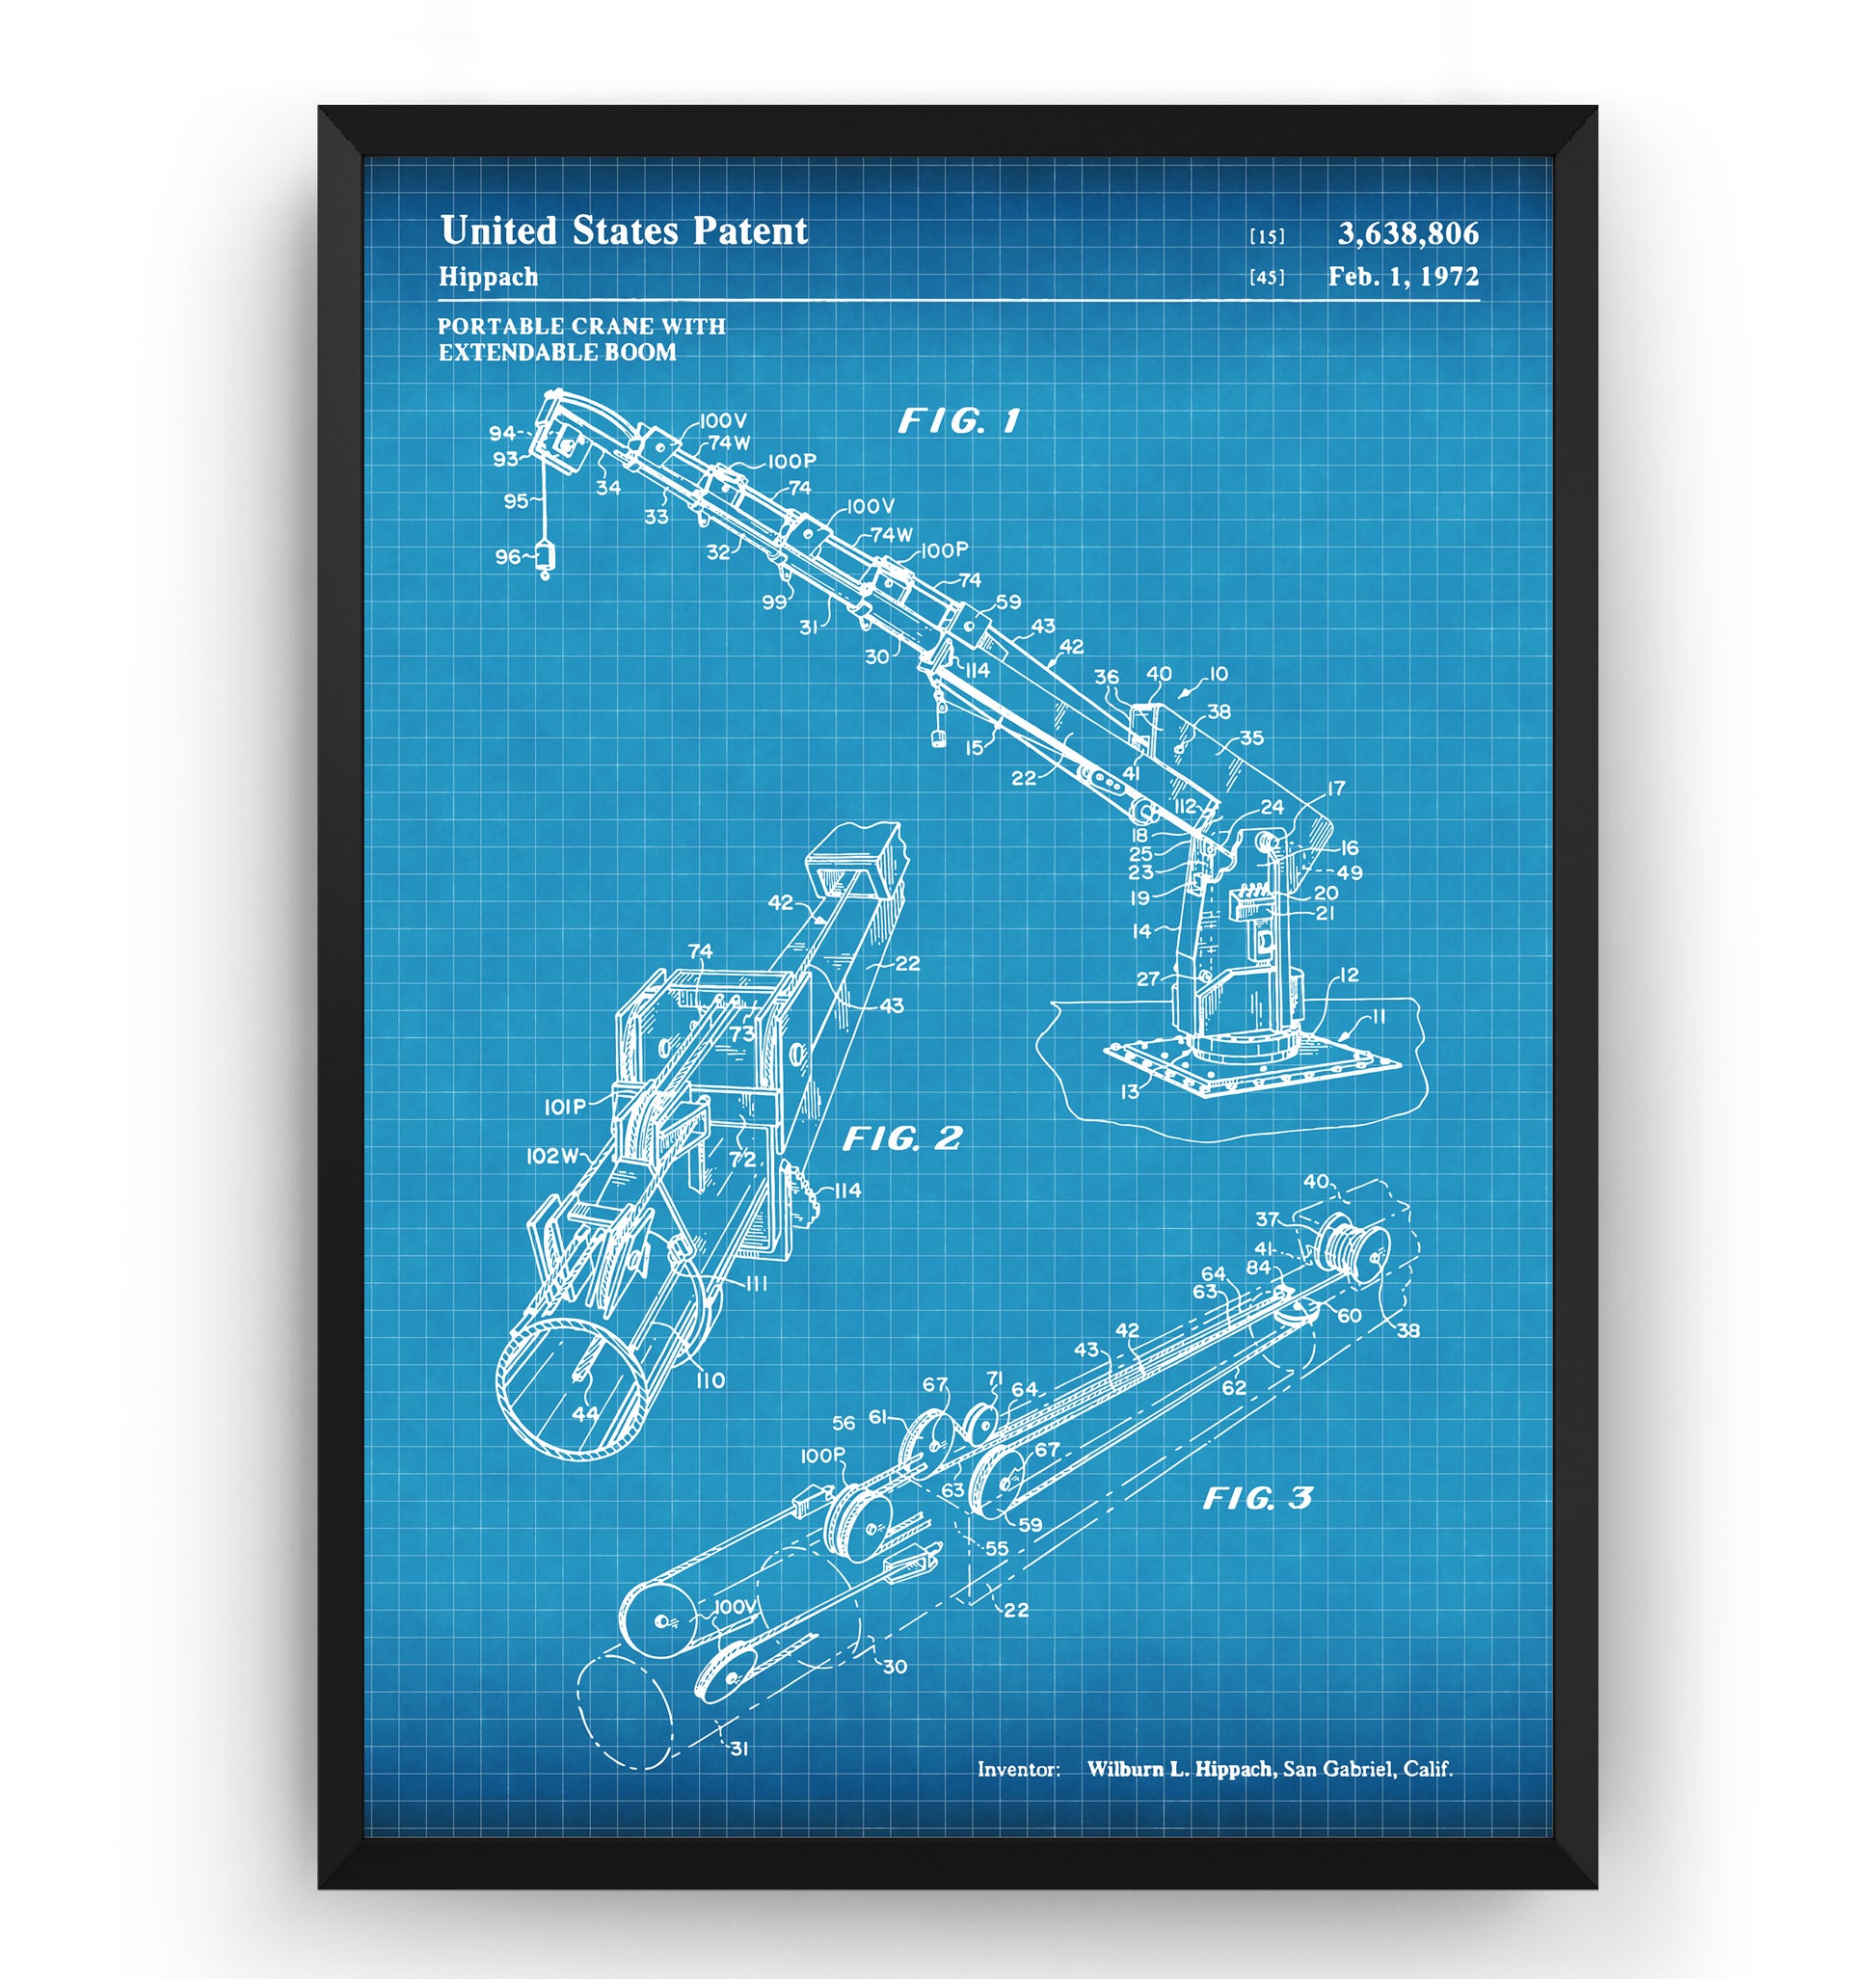 Portable Crane With Extendable Boom 1972 Patent Print - Magic Posters